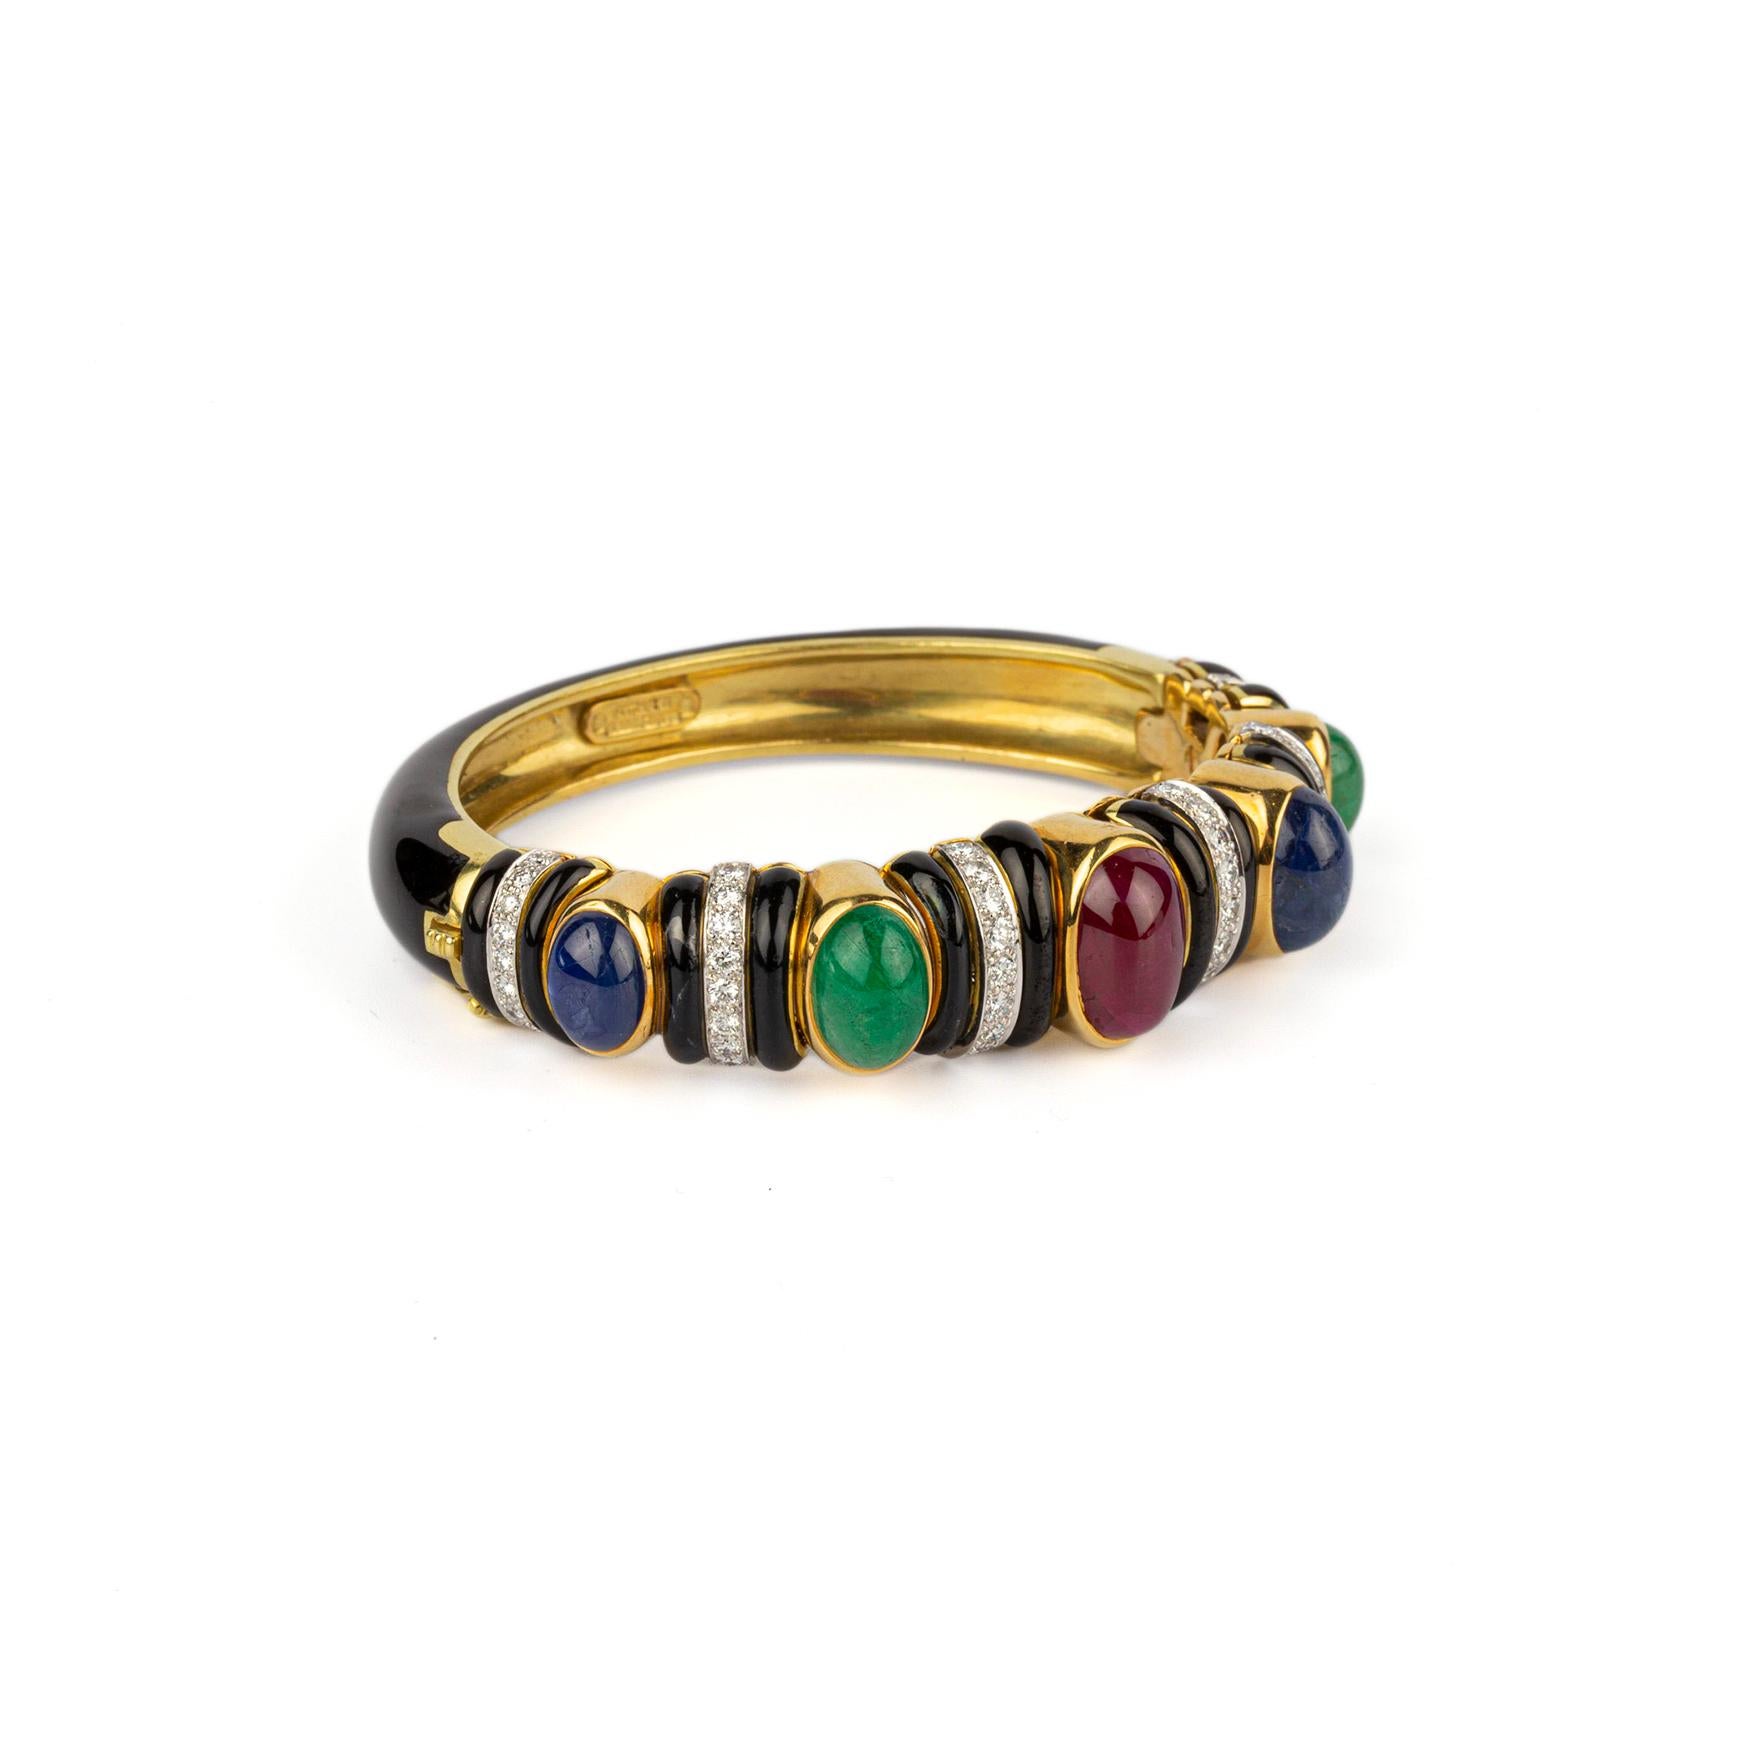 David Webb 18k Yellow Gold Bangle Bracelet, with cabochon Sapphires, Emeralds, and Rubies. Made in the USA, circa 1975.